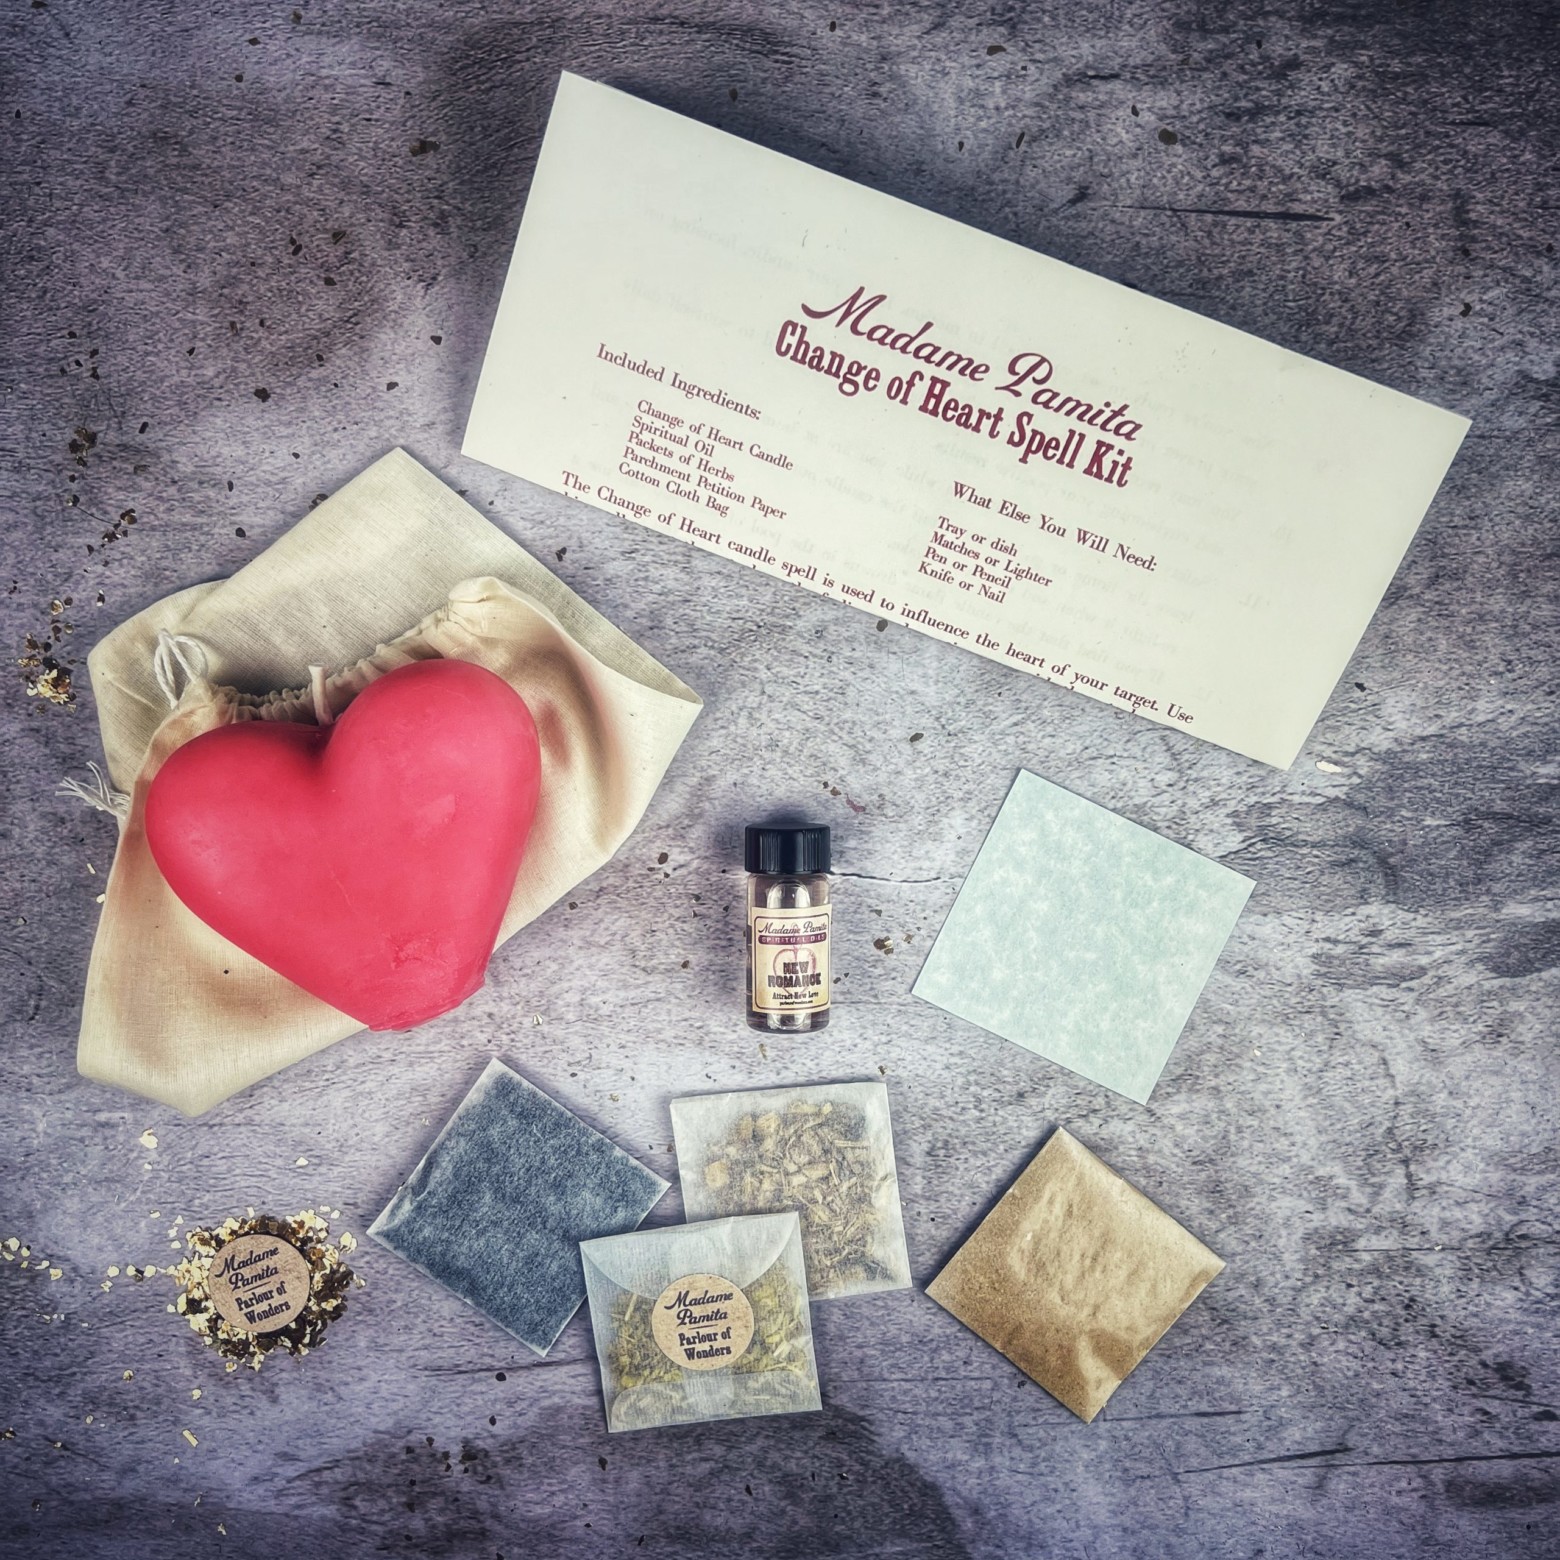 Change of Heart Candle Spell Kit